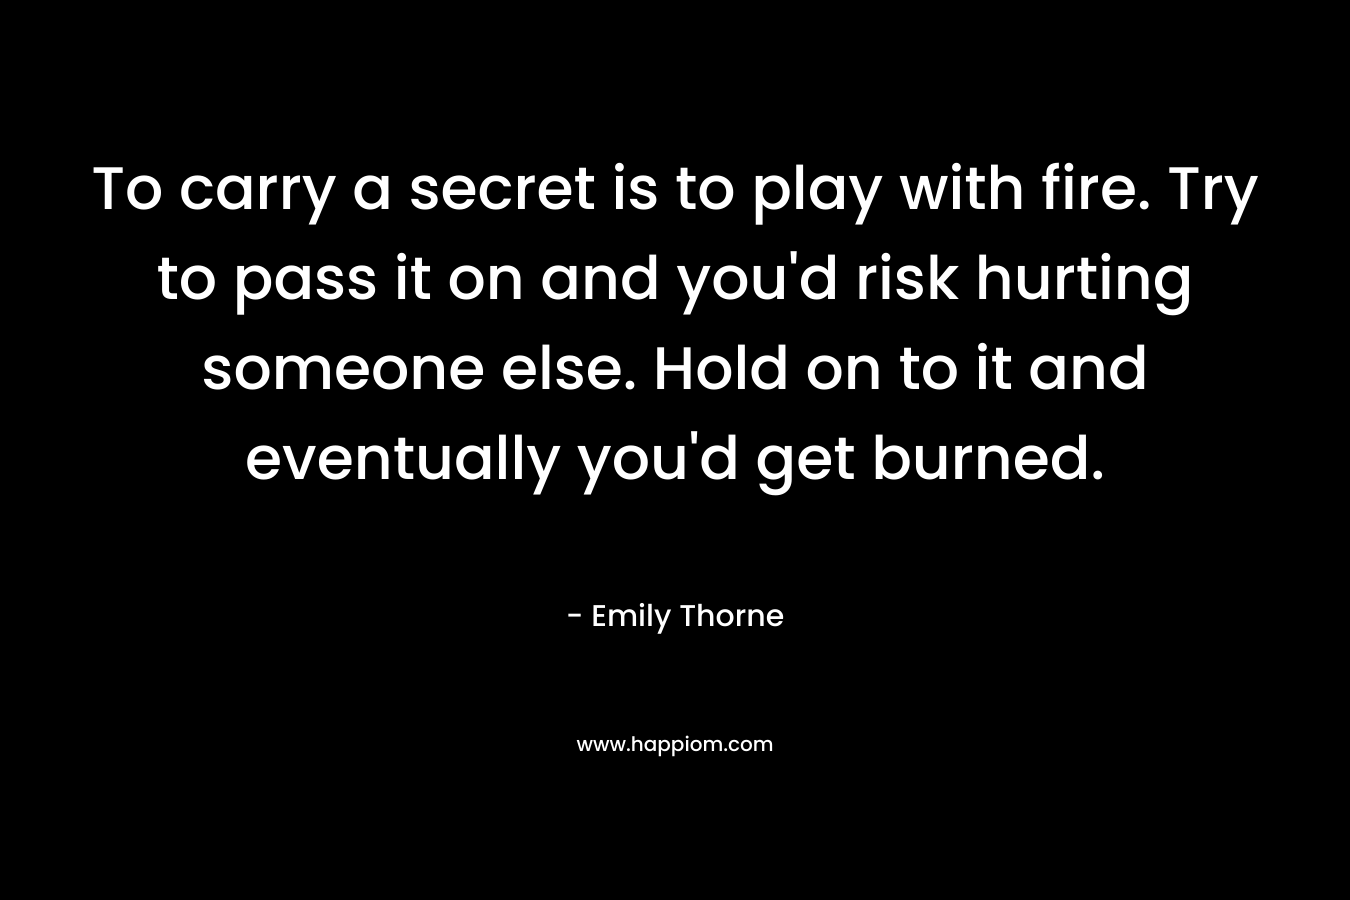 To carry a secret is to play with fire. Try to pass it on and you'd risk hurting someone else. Hold on to it and eventually you'd get burned.